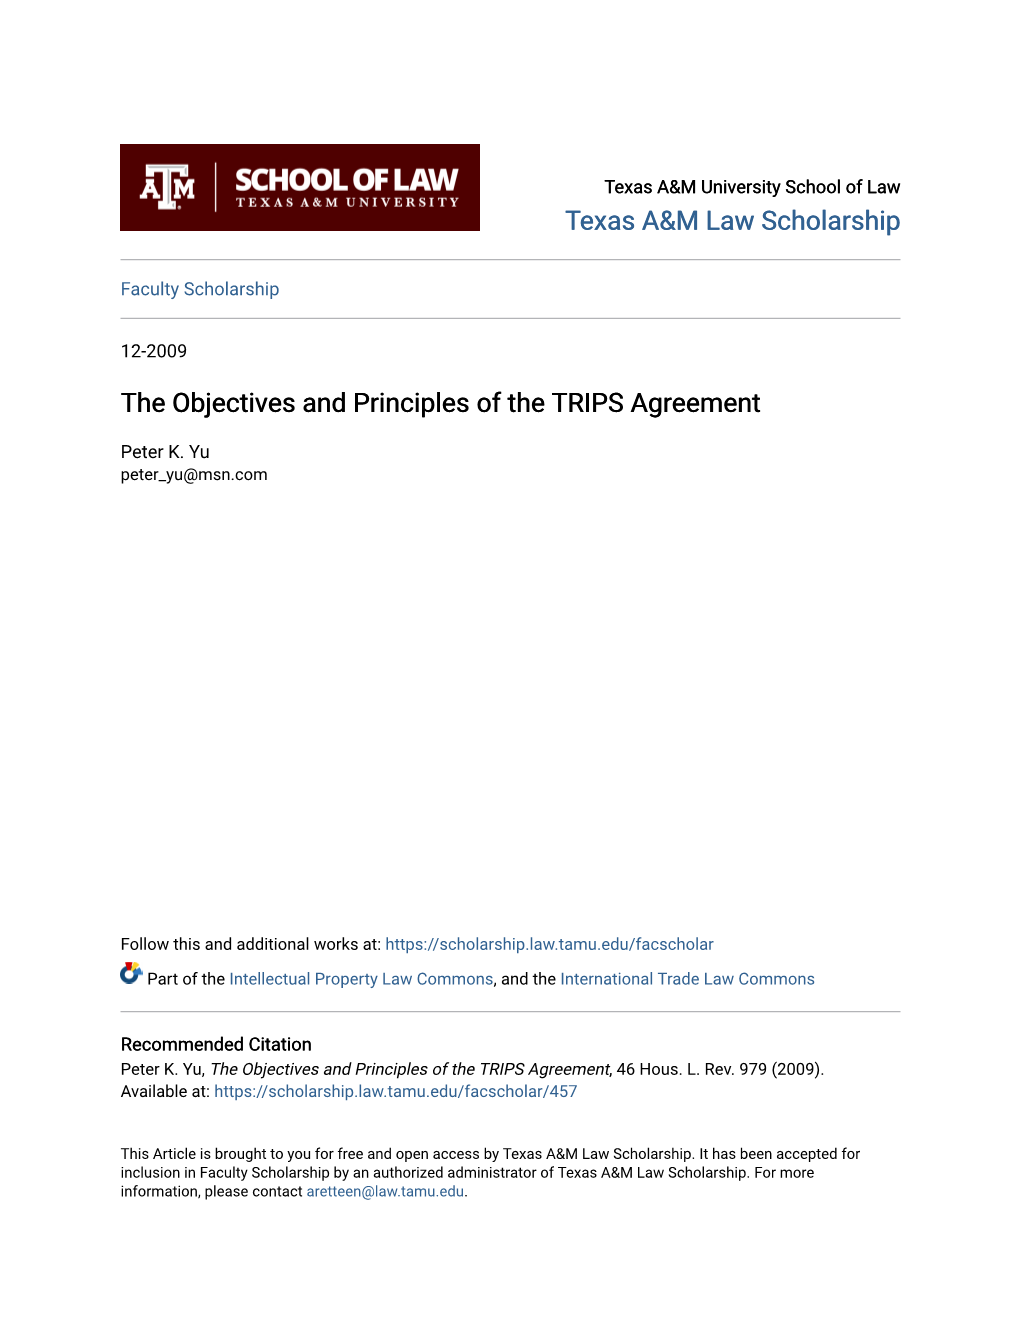 The Objectives and Principles of the TRIPS Agreement